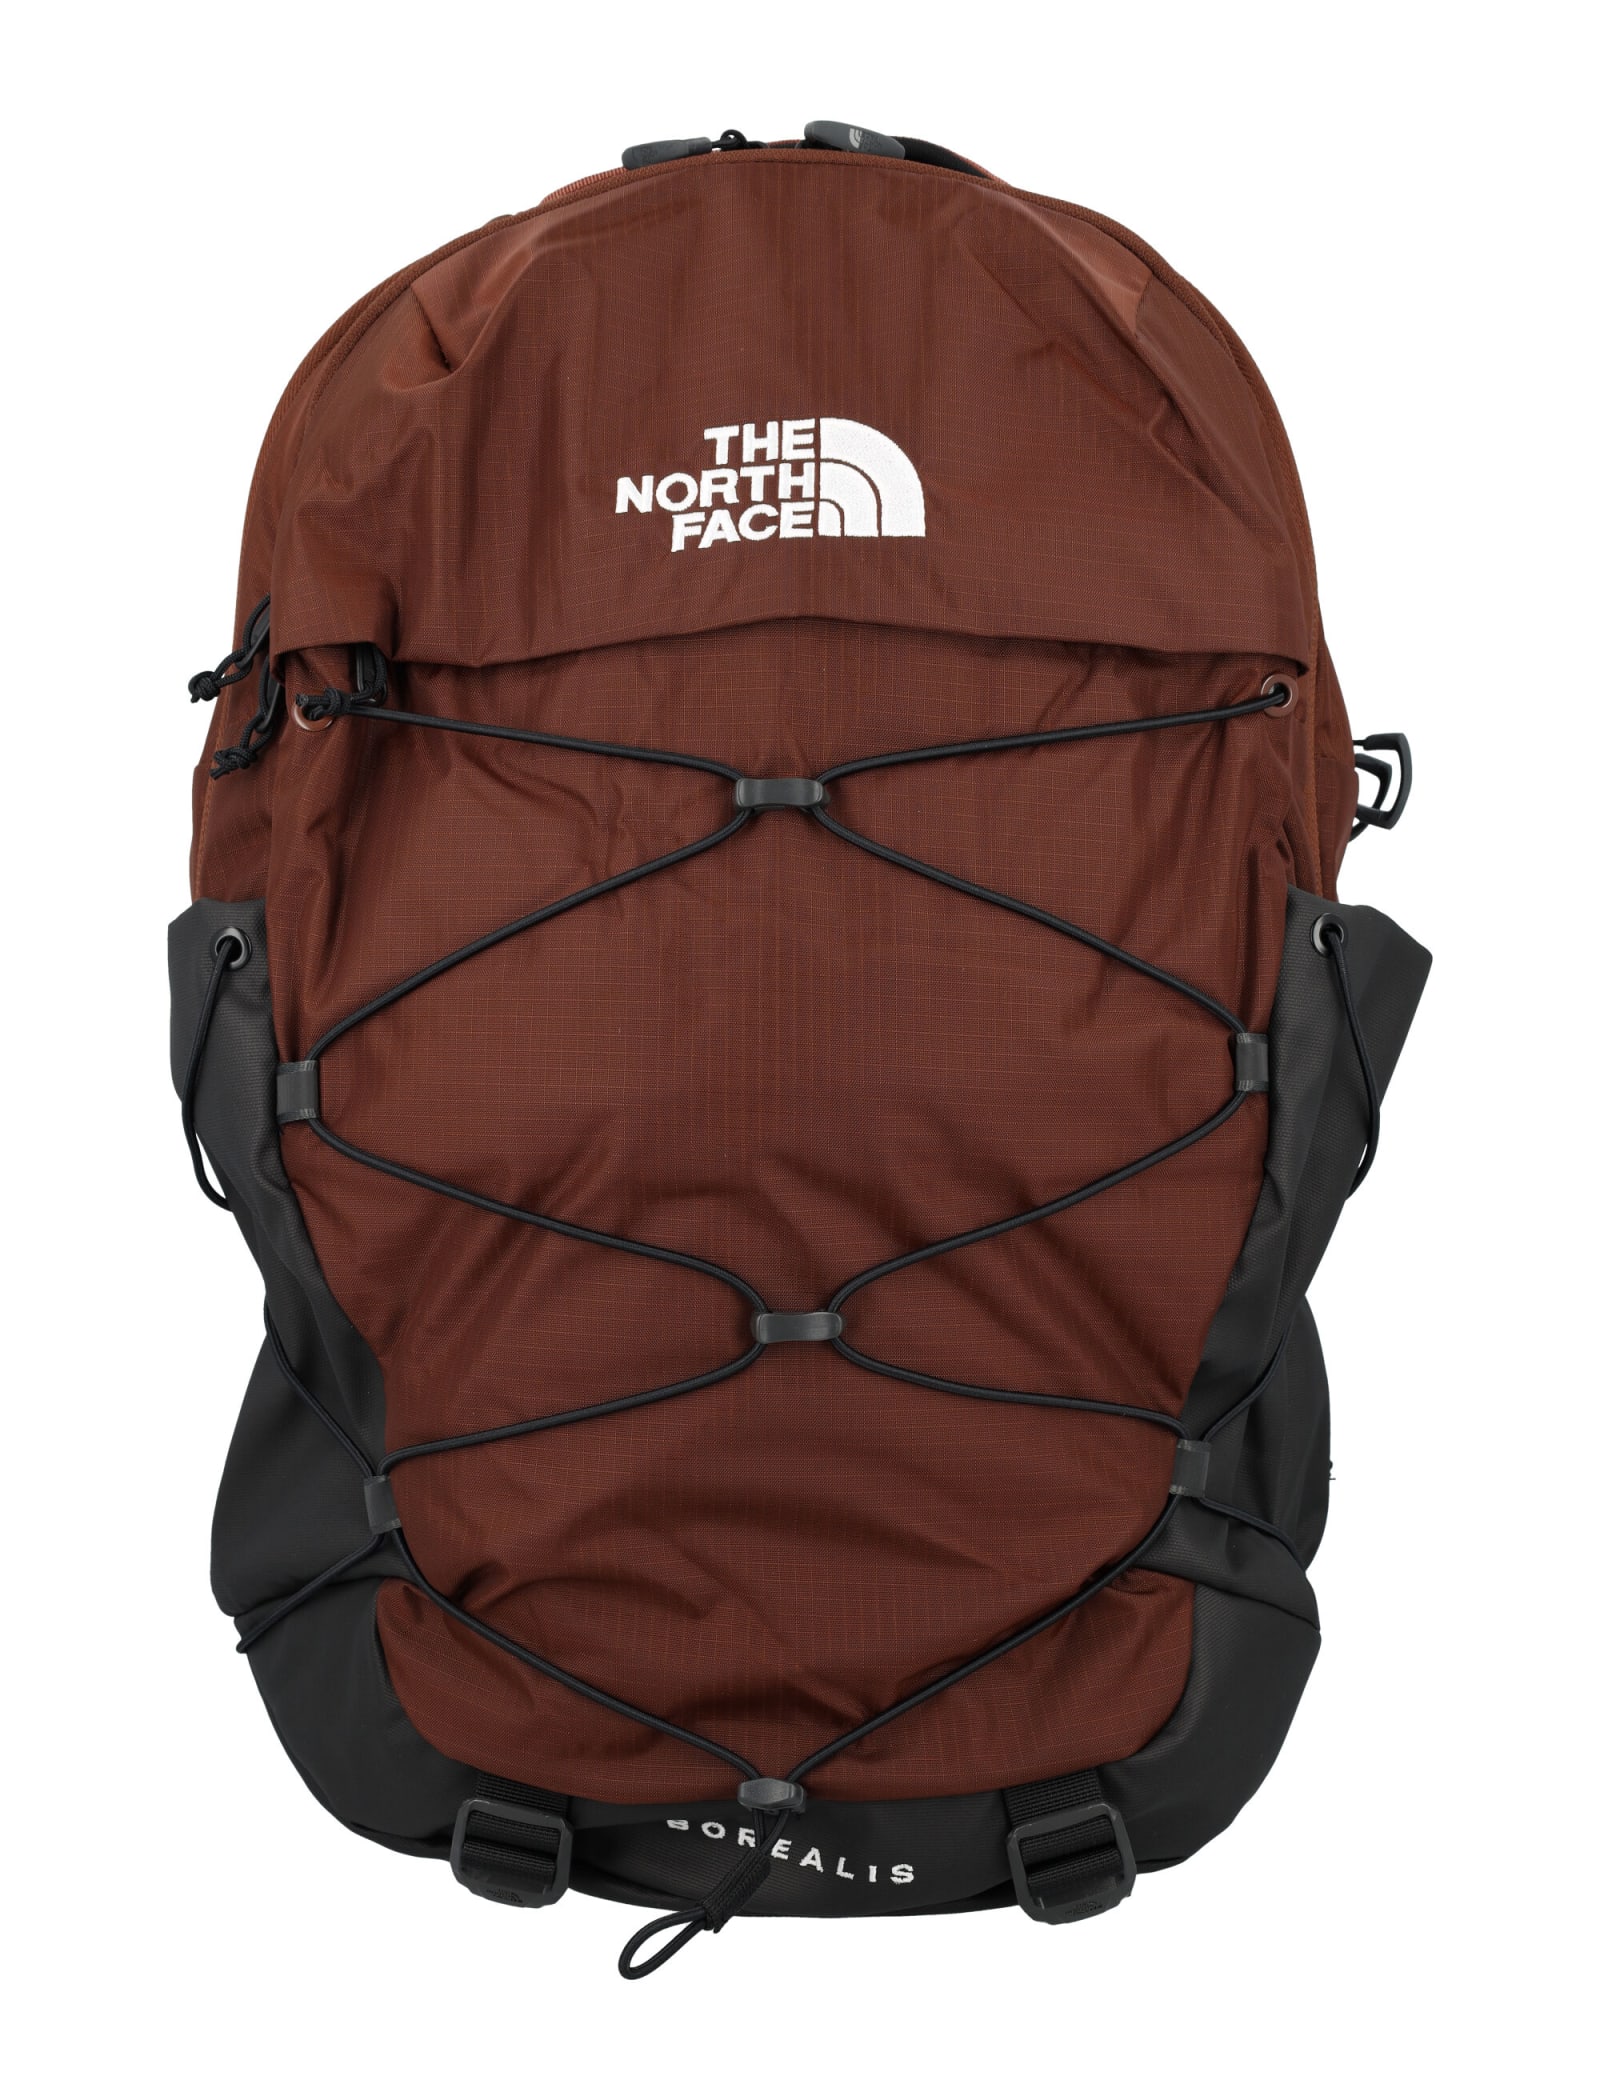 The North Face Borealis Backpack In Brown